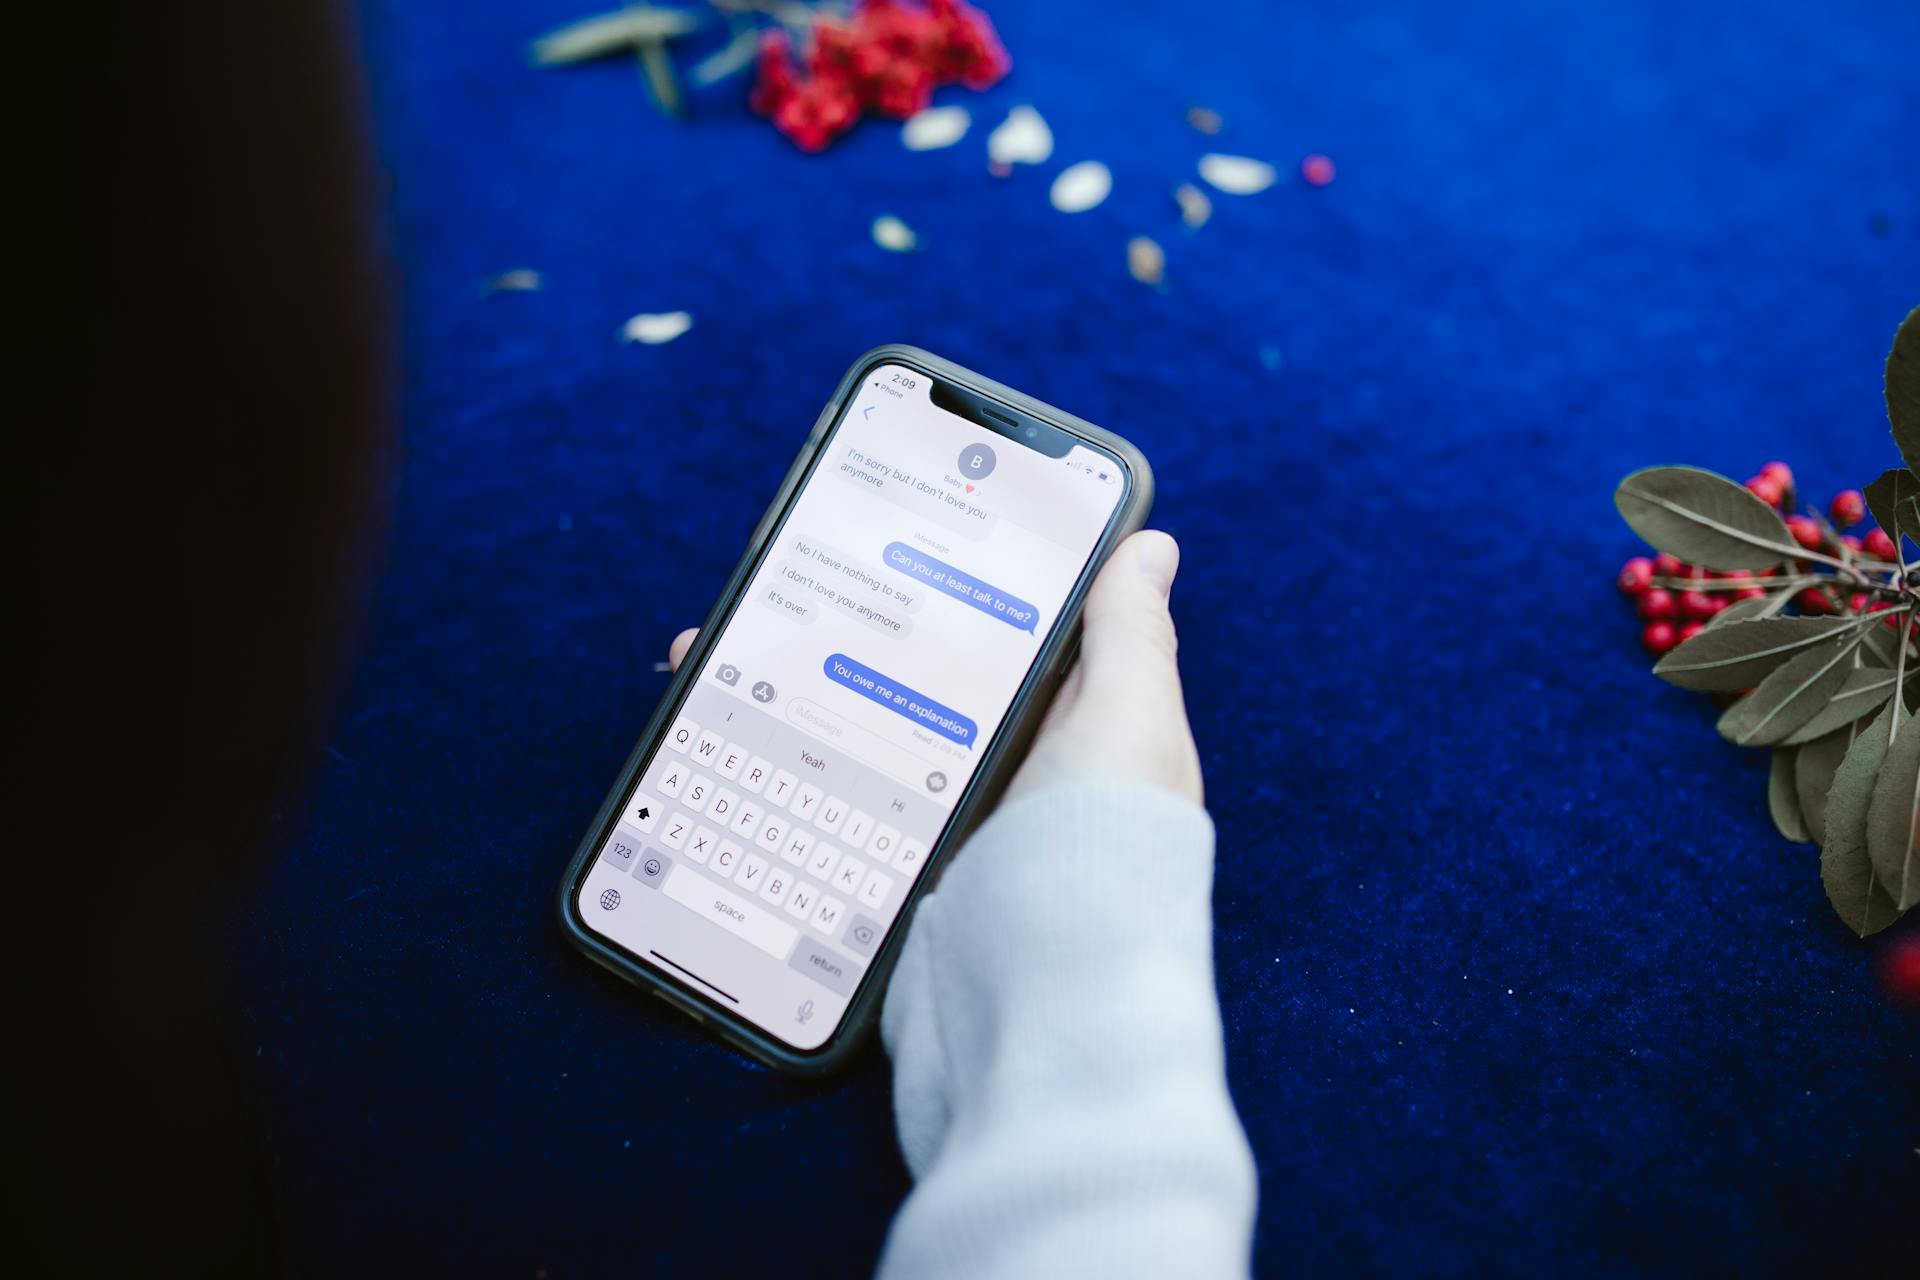 A person reading text messages on their phone | Source: Pexels